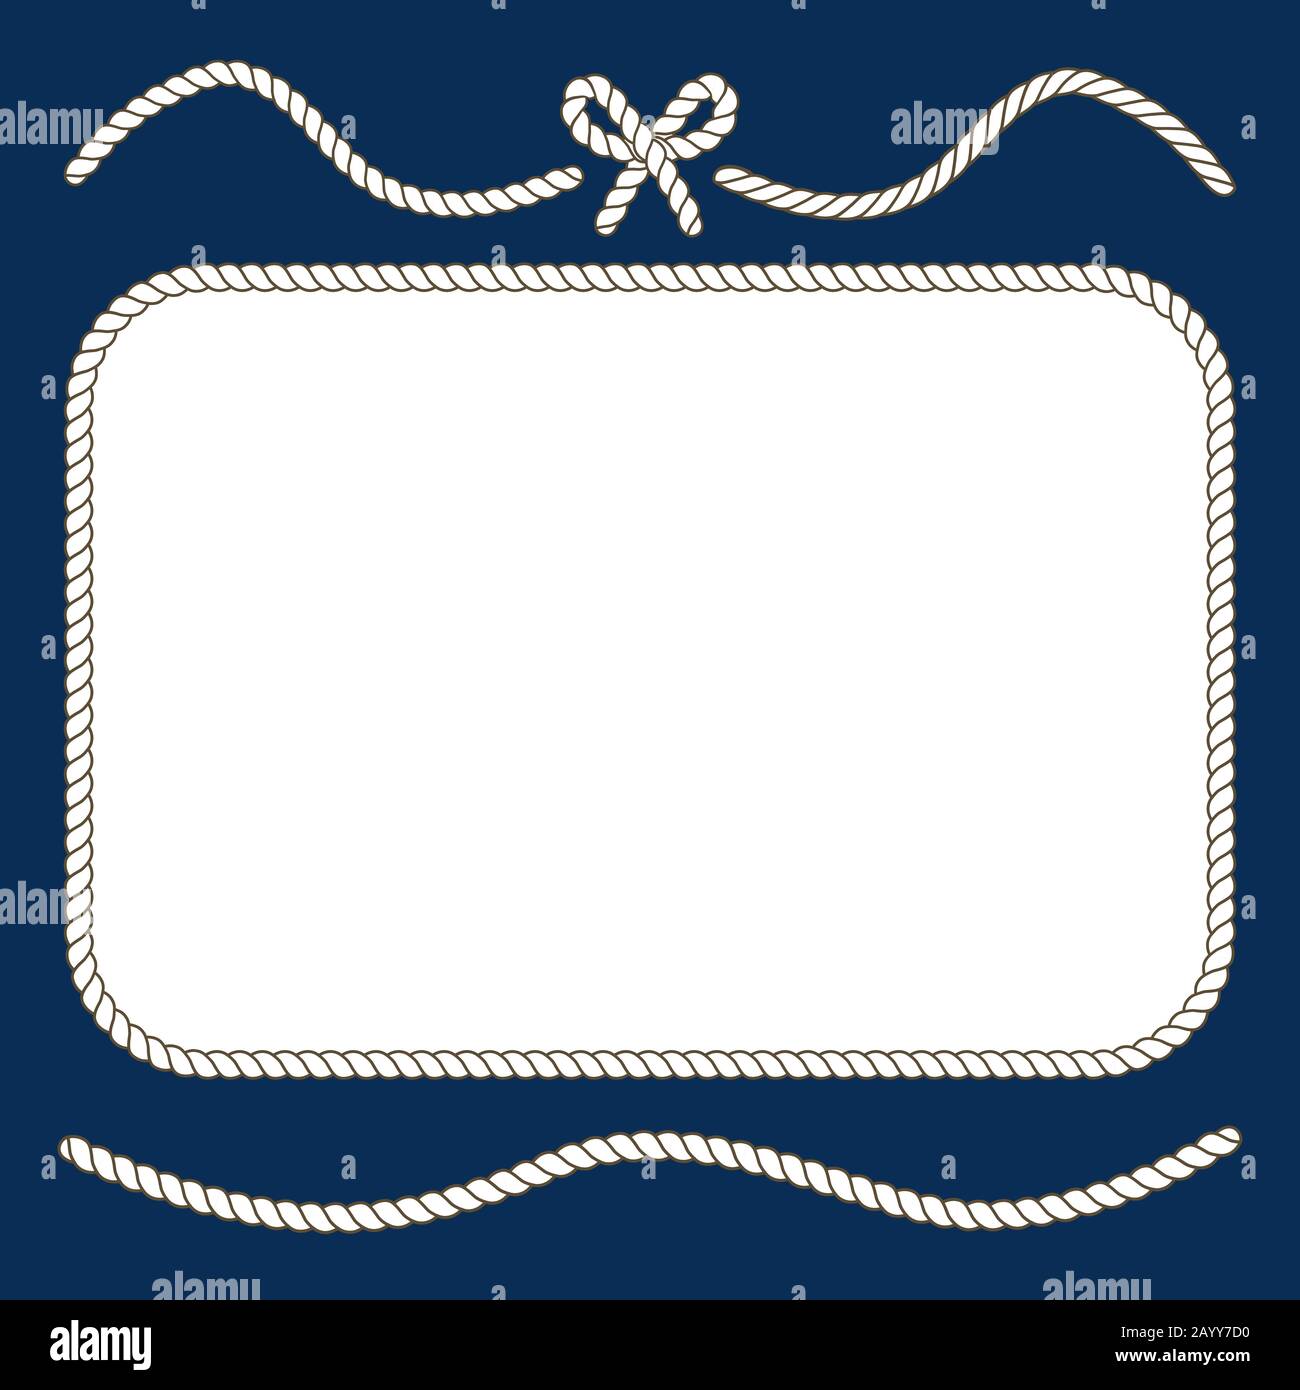 Nautical ropes and bow frame. Twisted cord design, vector illustration Stock Vector